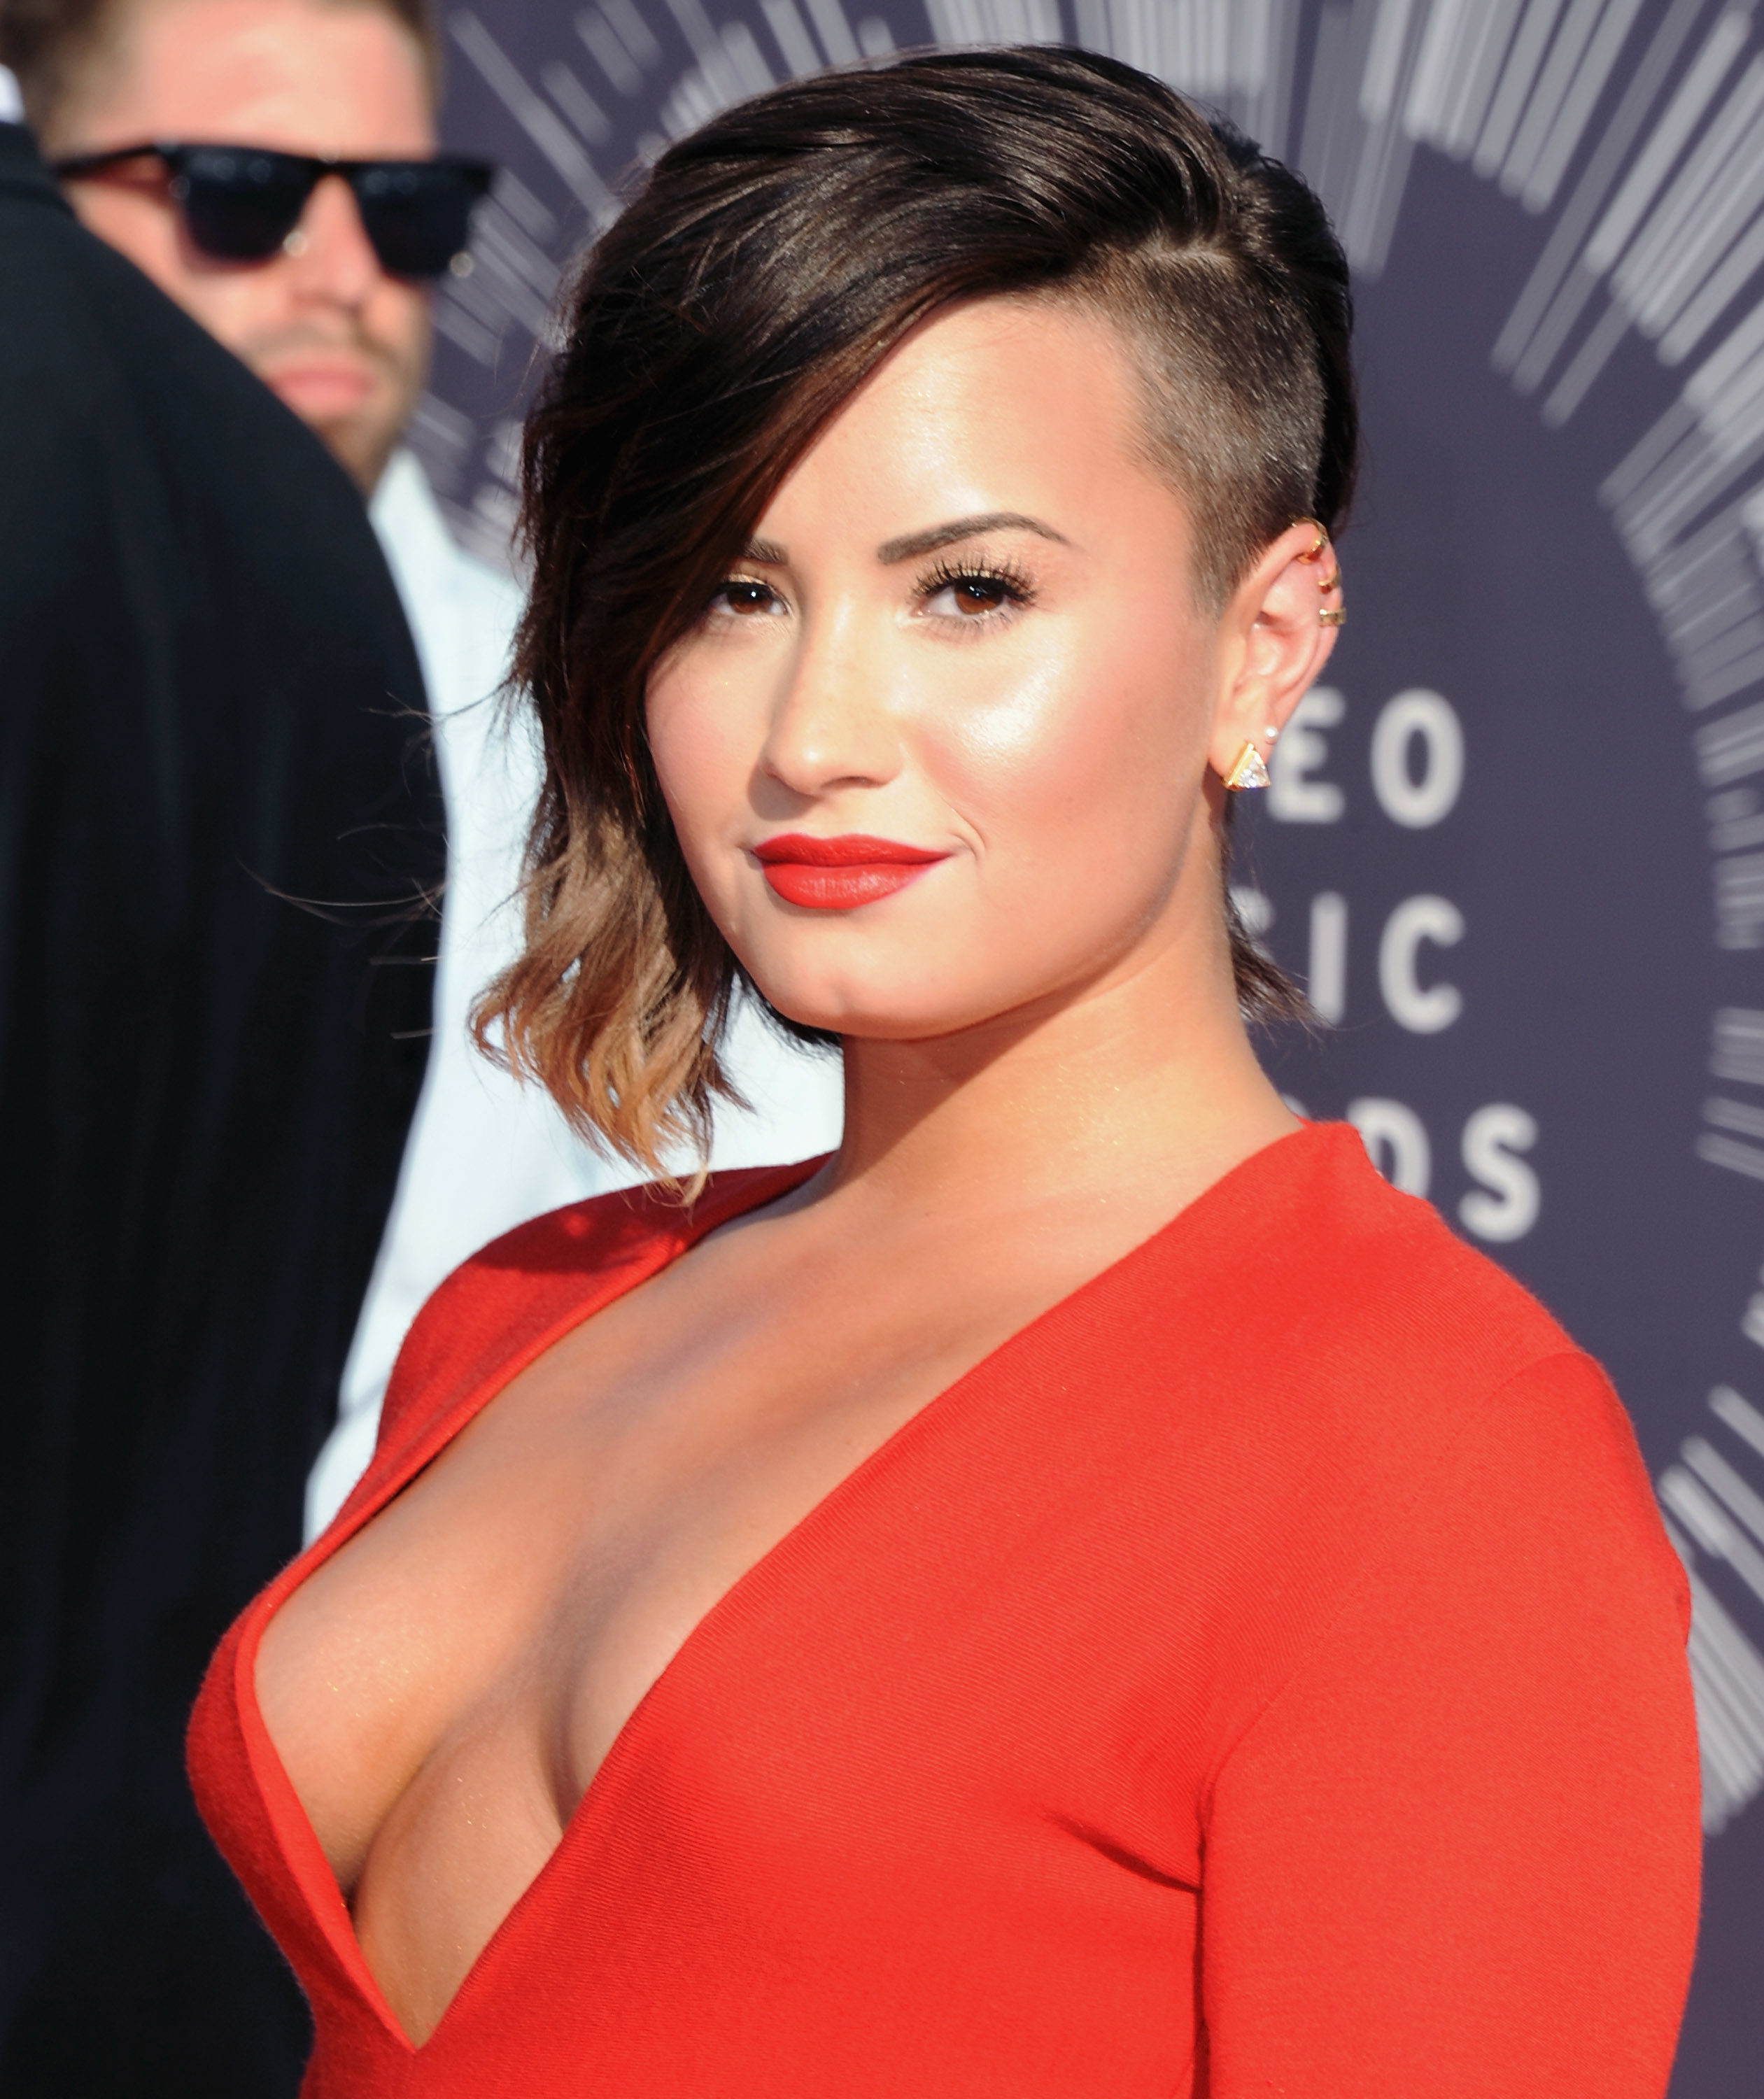 Demi Lovato Shaves Her Head And Gets An Undercut